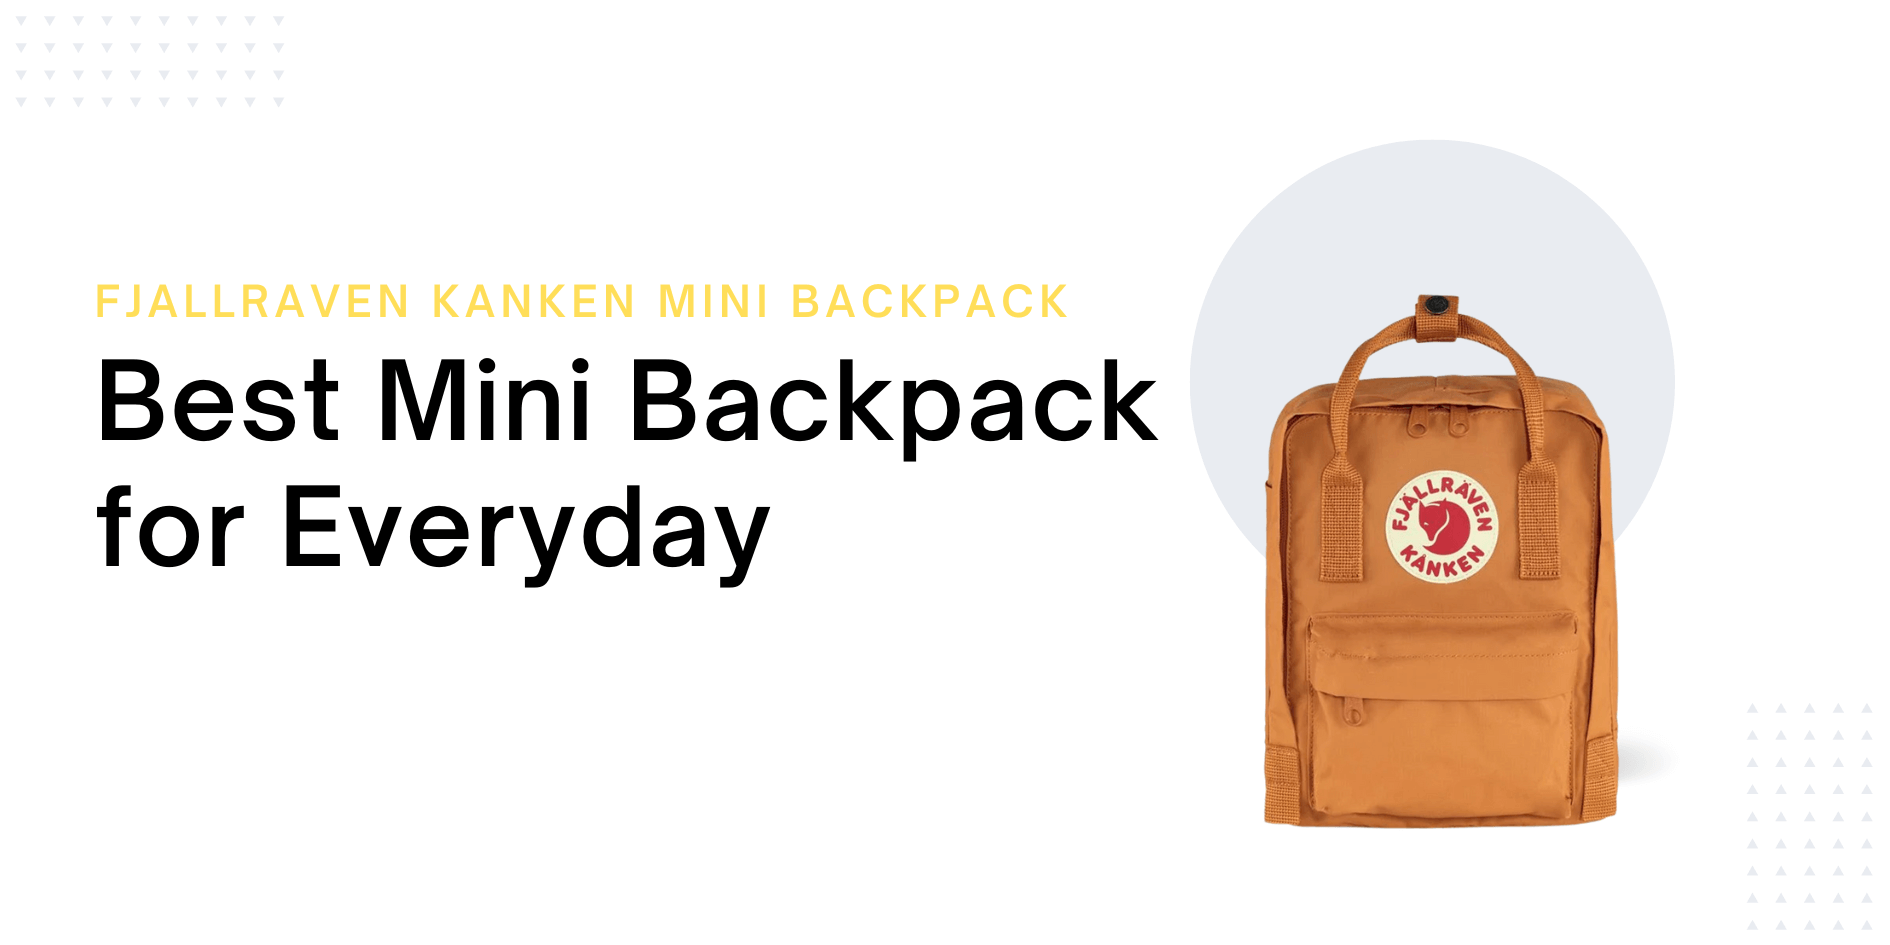 Best Mini Backpack for Everyday